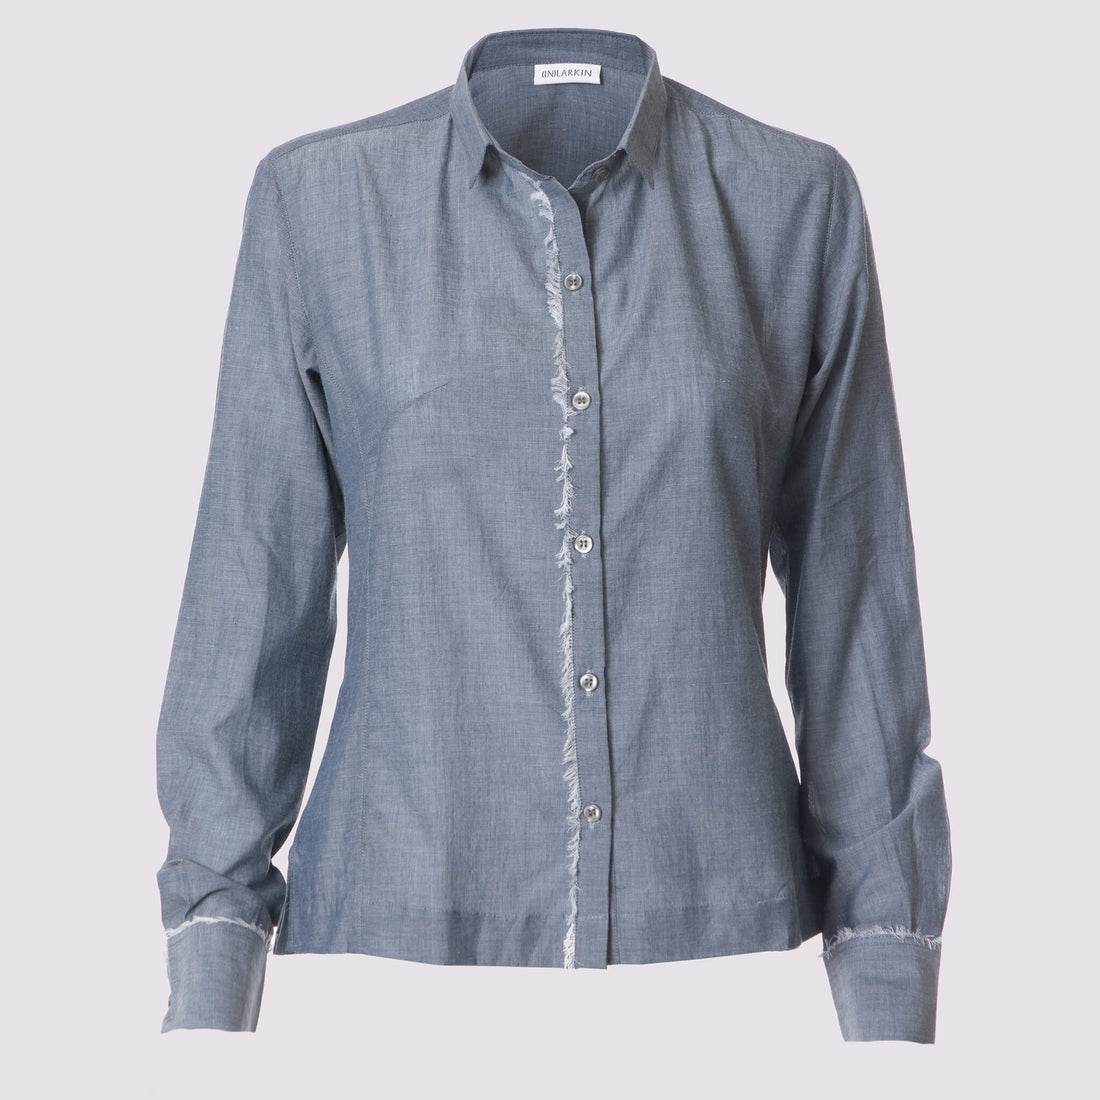  front view of the blue classic updated chemise shirt by inlarkin showing the darts at bust detail, full length sleeves and raw-edge placket down the center front and at cuffs in cotton chambray fabric